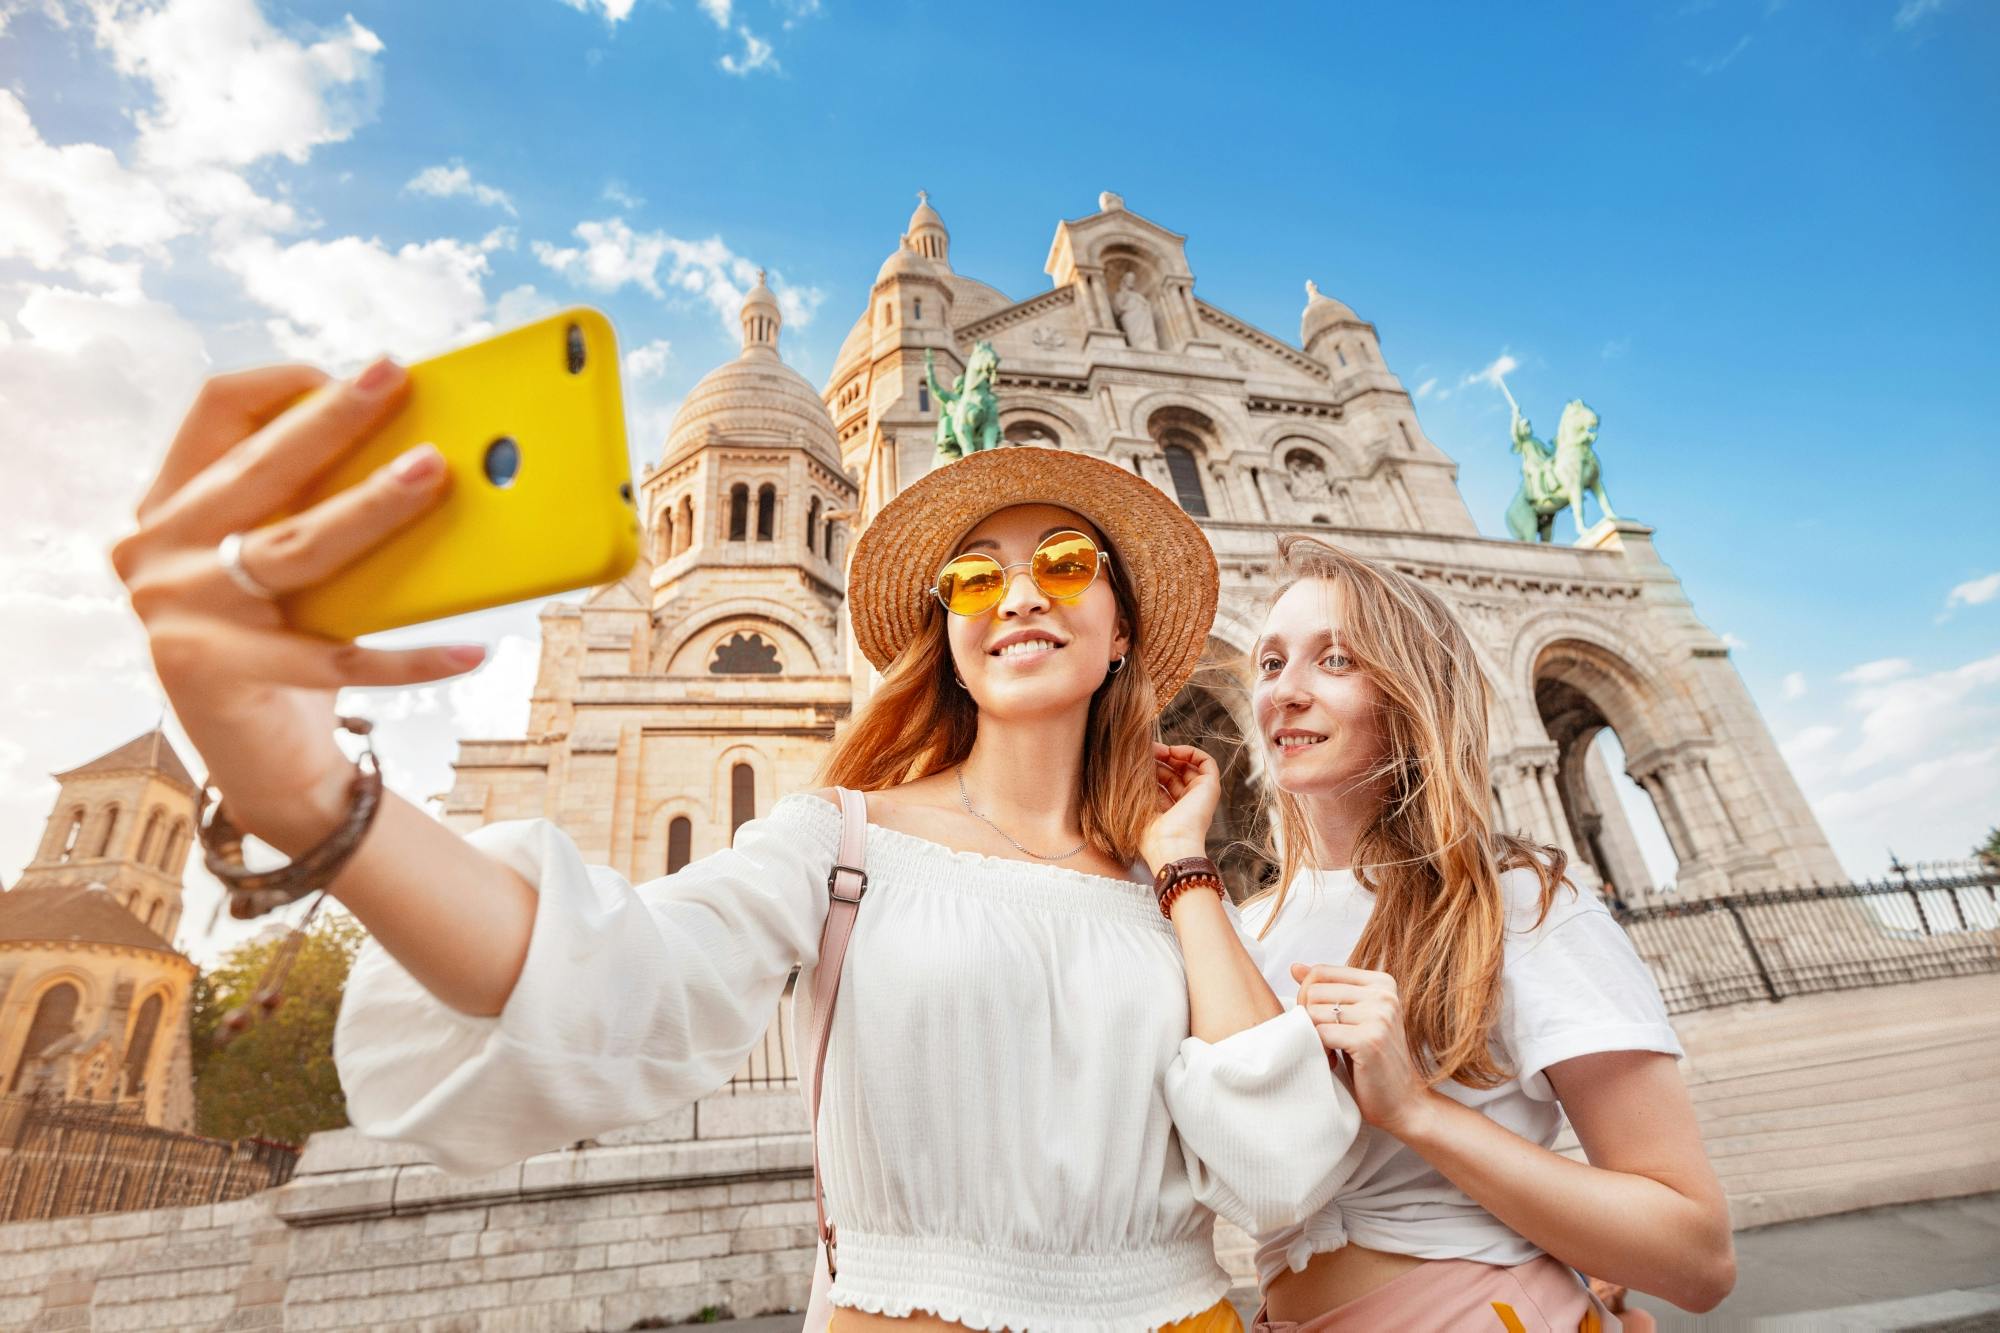 Sigthseeing cruise and self guided tour of Paris on your smartphone Musement